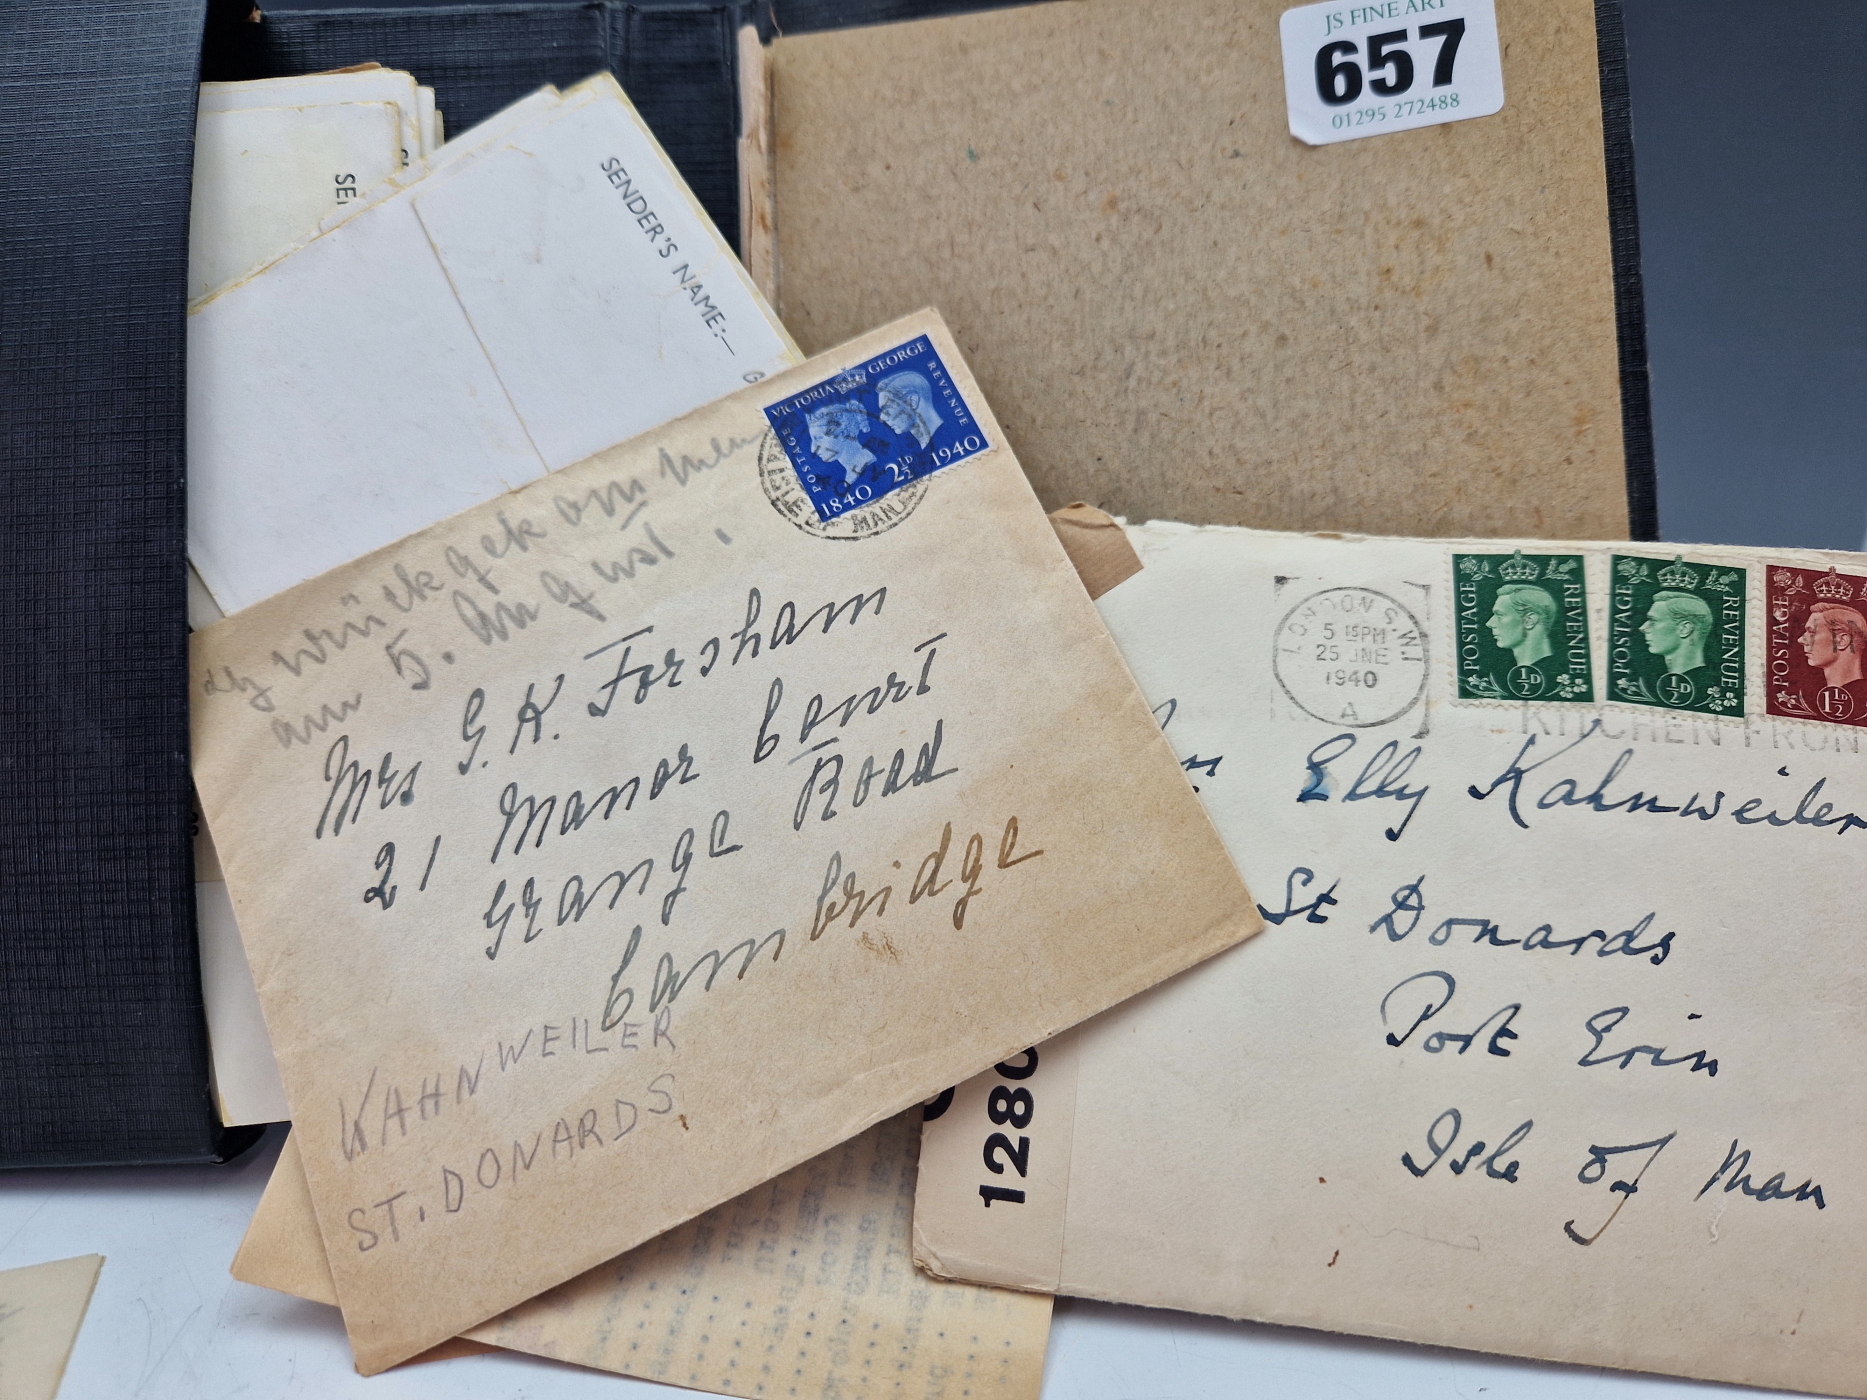 ELLY AND GUSTAV KAHNWEILER: LETTERS SAVED BY ELLY FROM HER HUSBAND WHILE THEY WERE SEPARATELY - Image 2 of 2